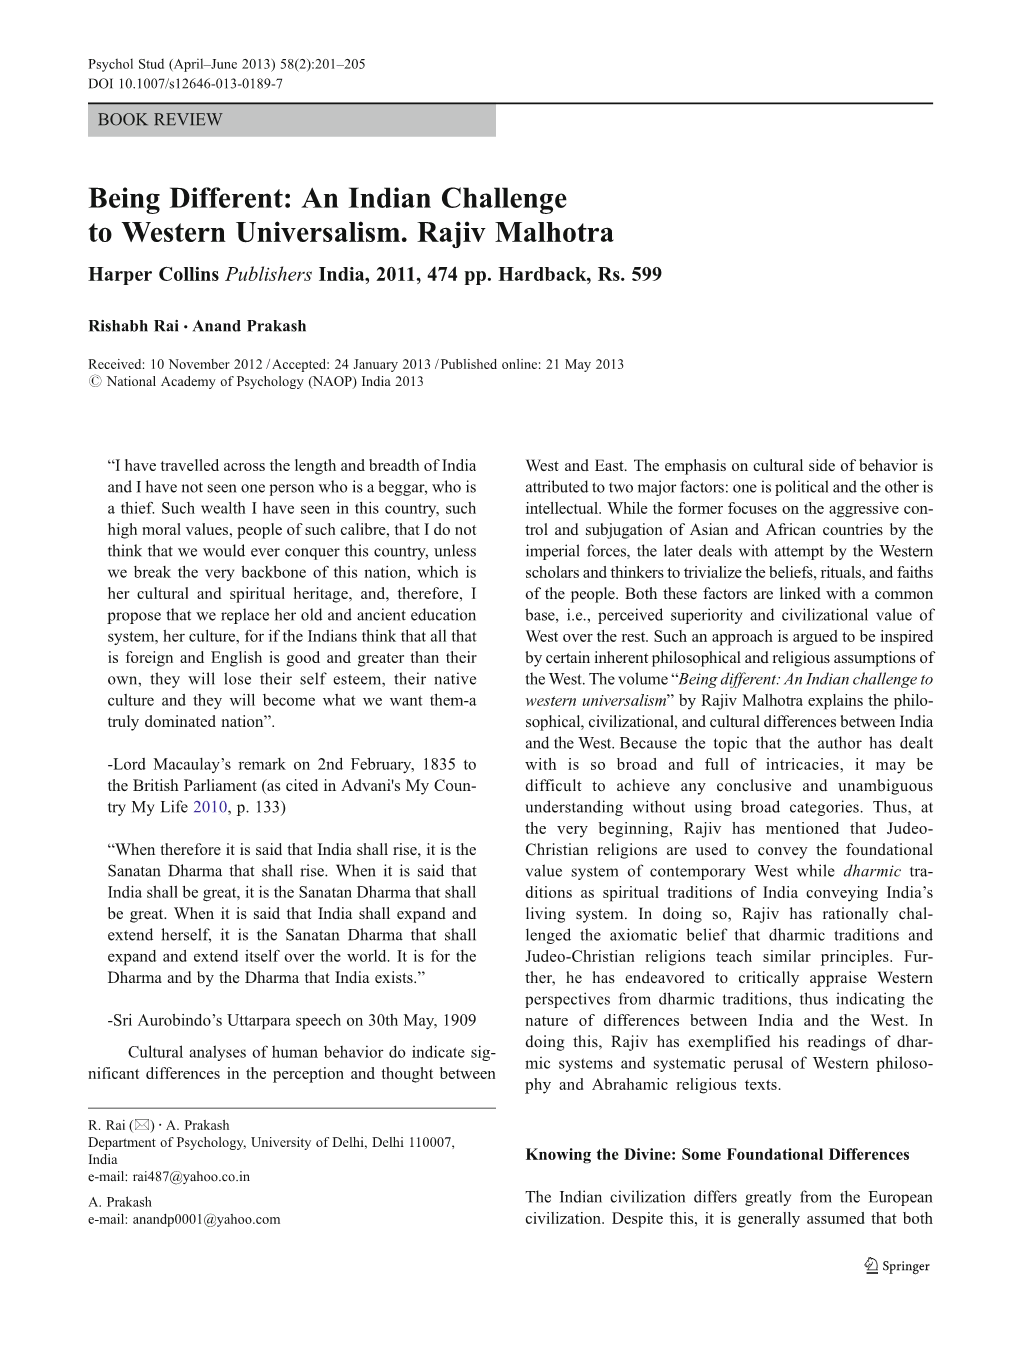 Being Different: an Indian Challenge to Western Universalism